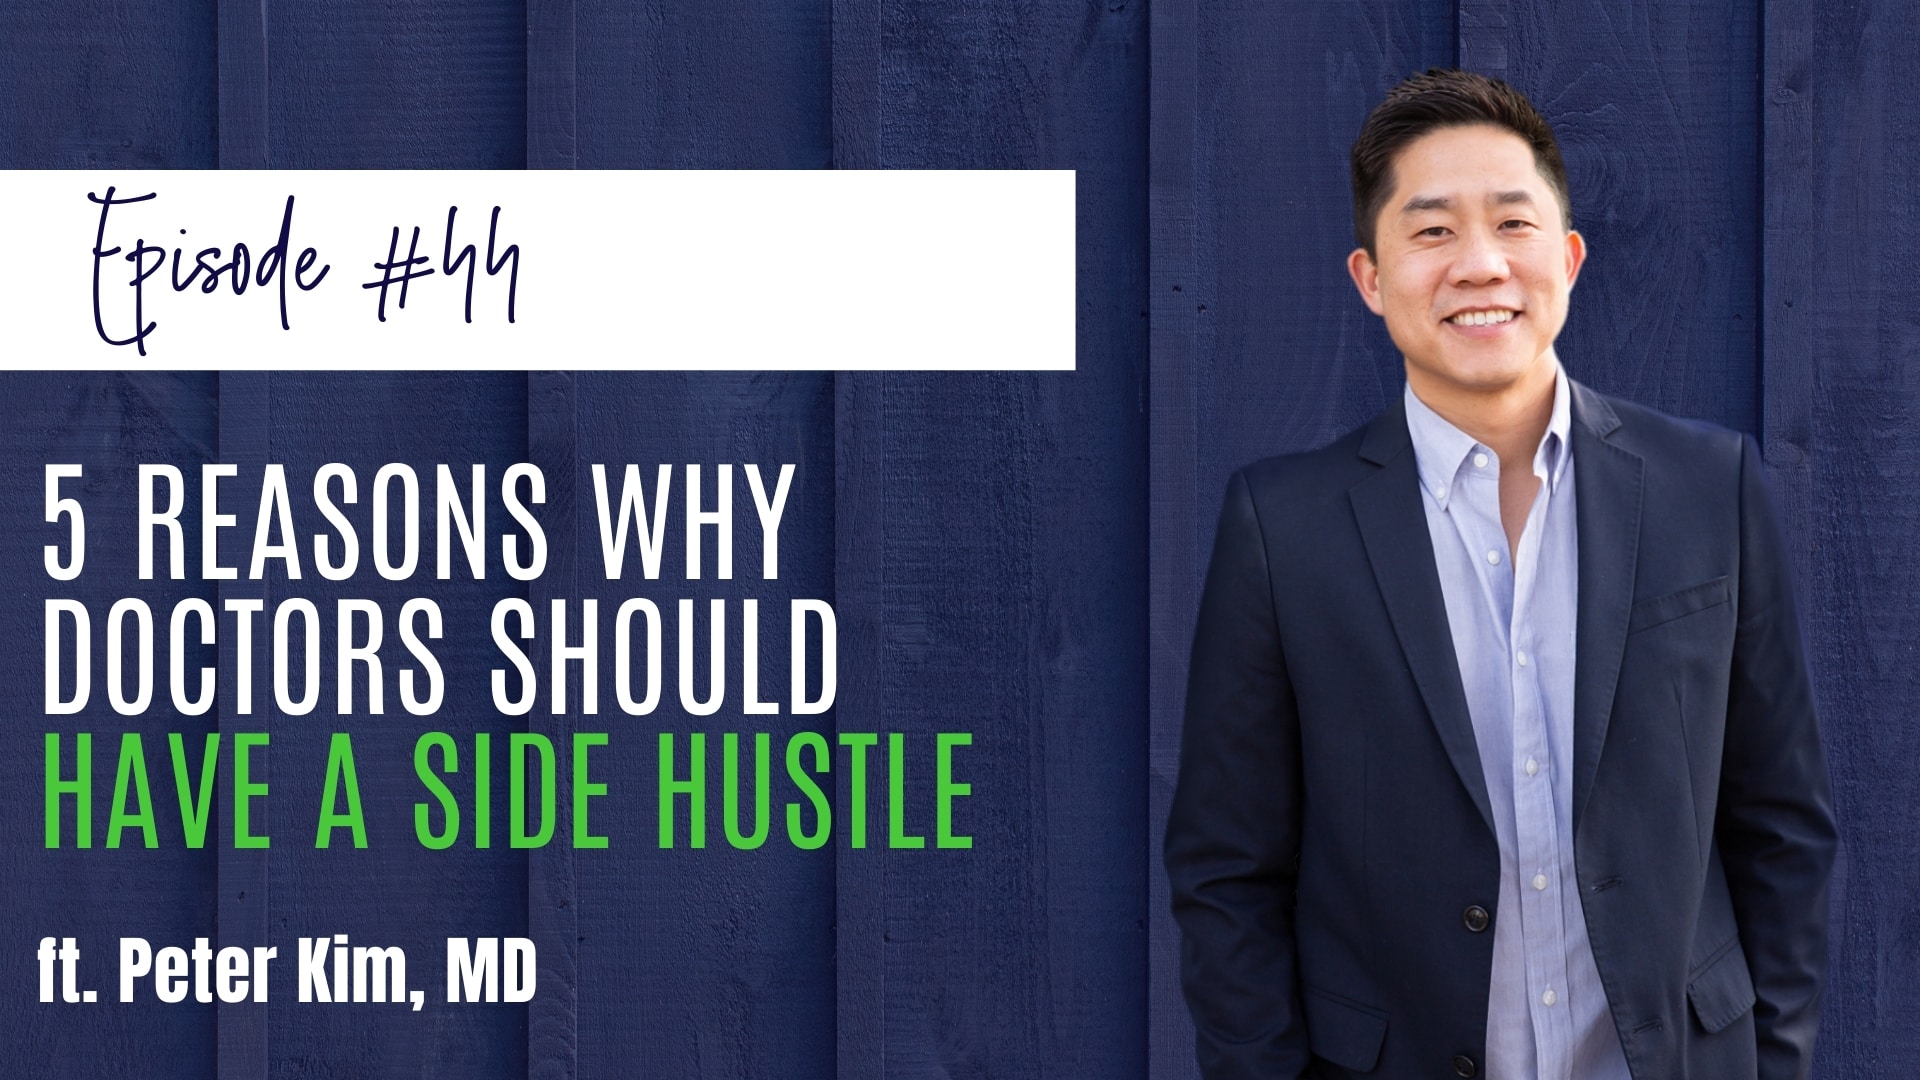 #44 5 Reasons Why Doctors Should Have a Side Hustle